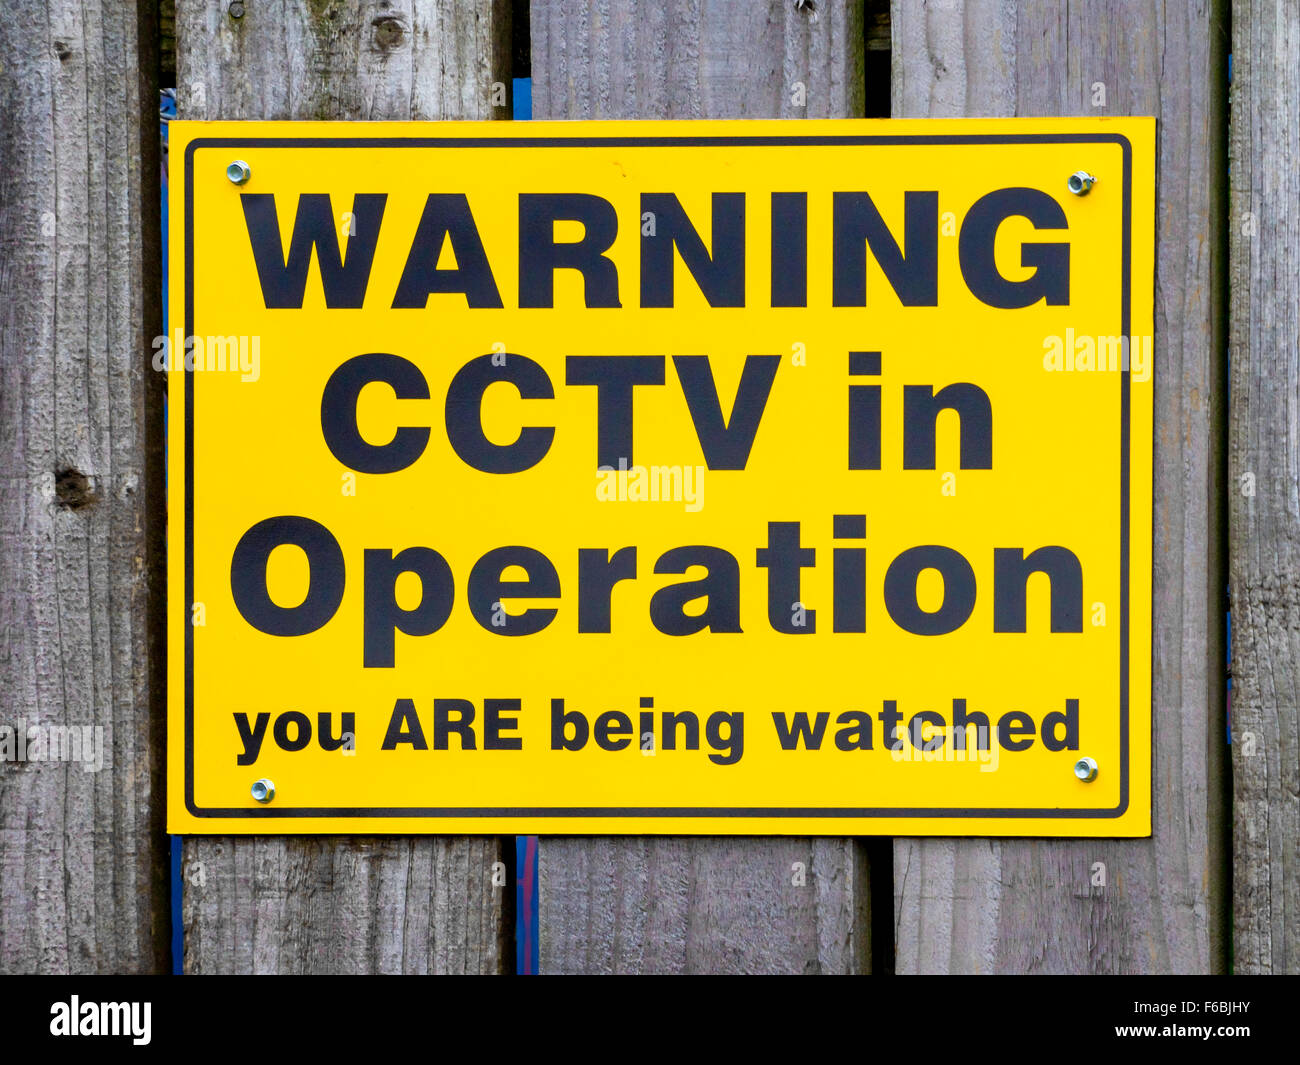 Notice warning of the presence of CCTV surveillance cameras Warning CCTV in operation you are being watched Stock Photo